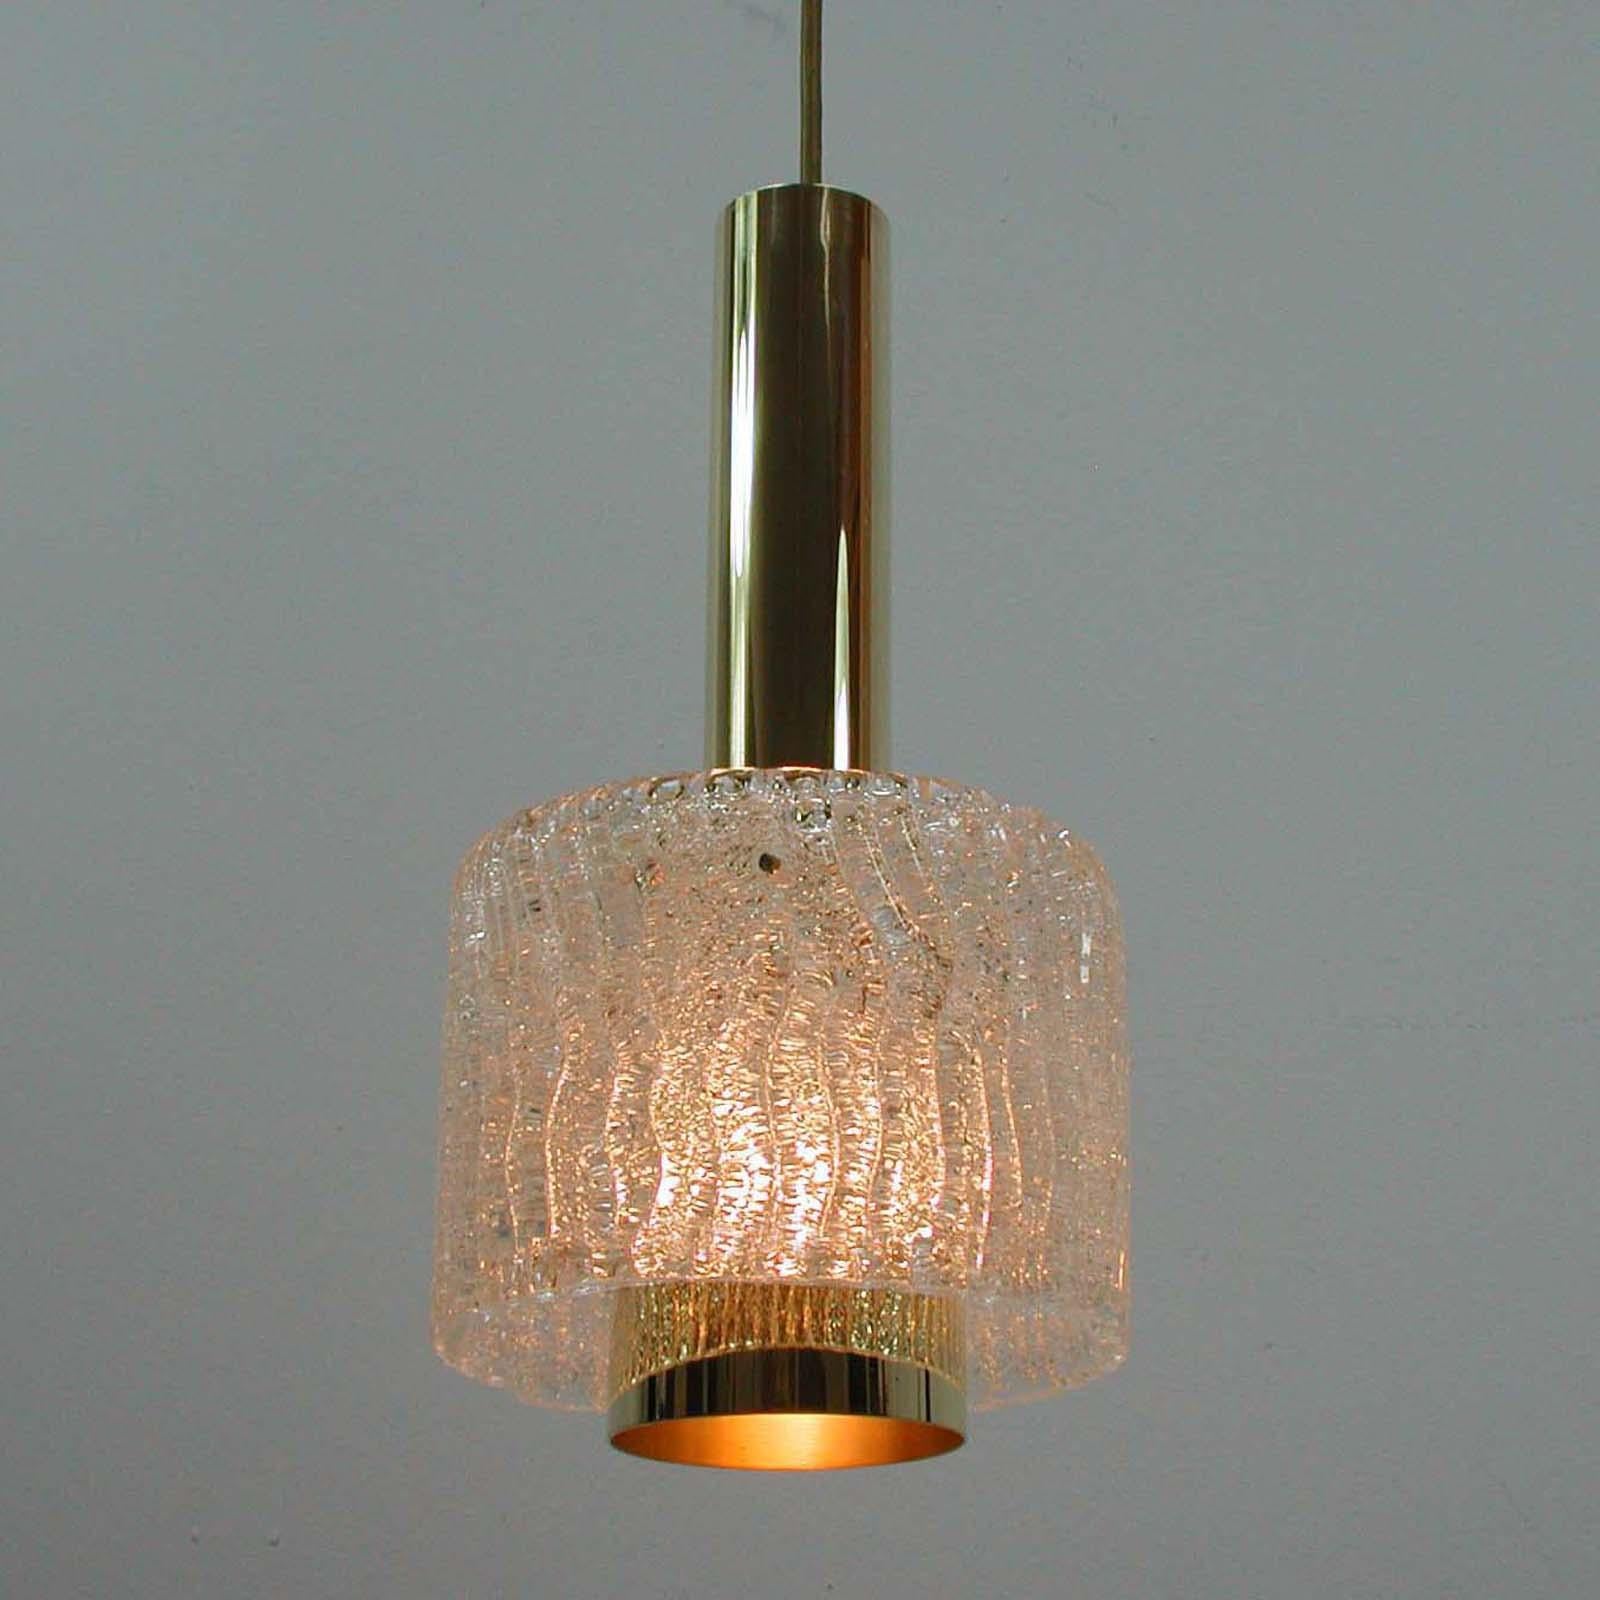 J.T. Kalmar Midcentury Textured Glass and Brass Pendant, 1950s For Sale 7